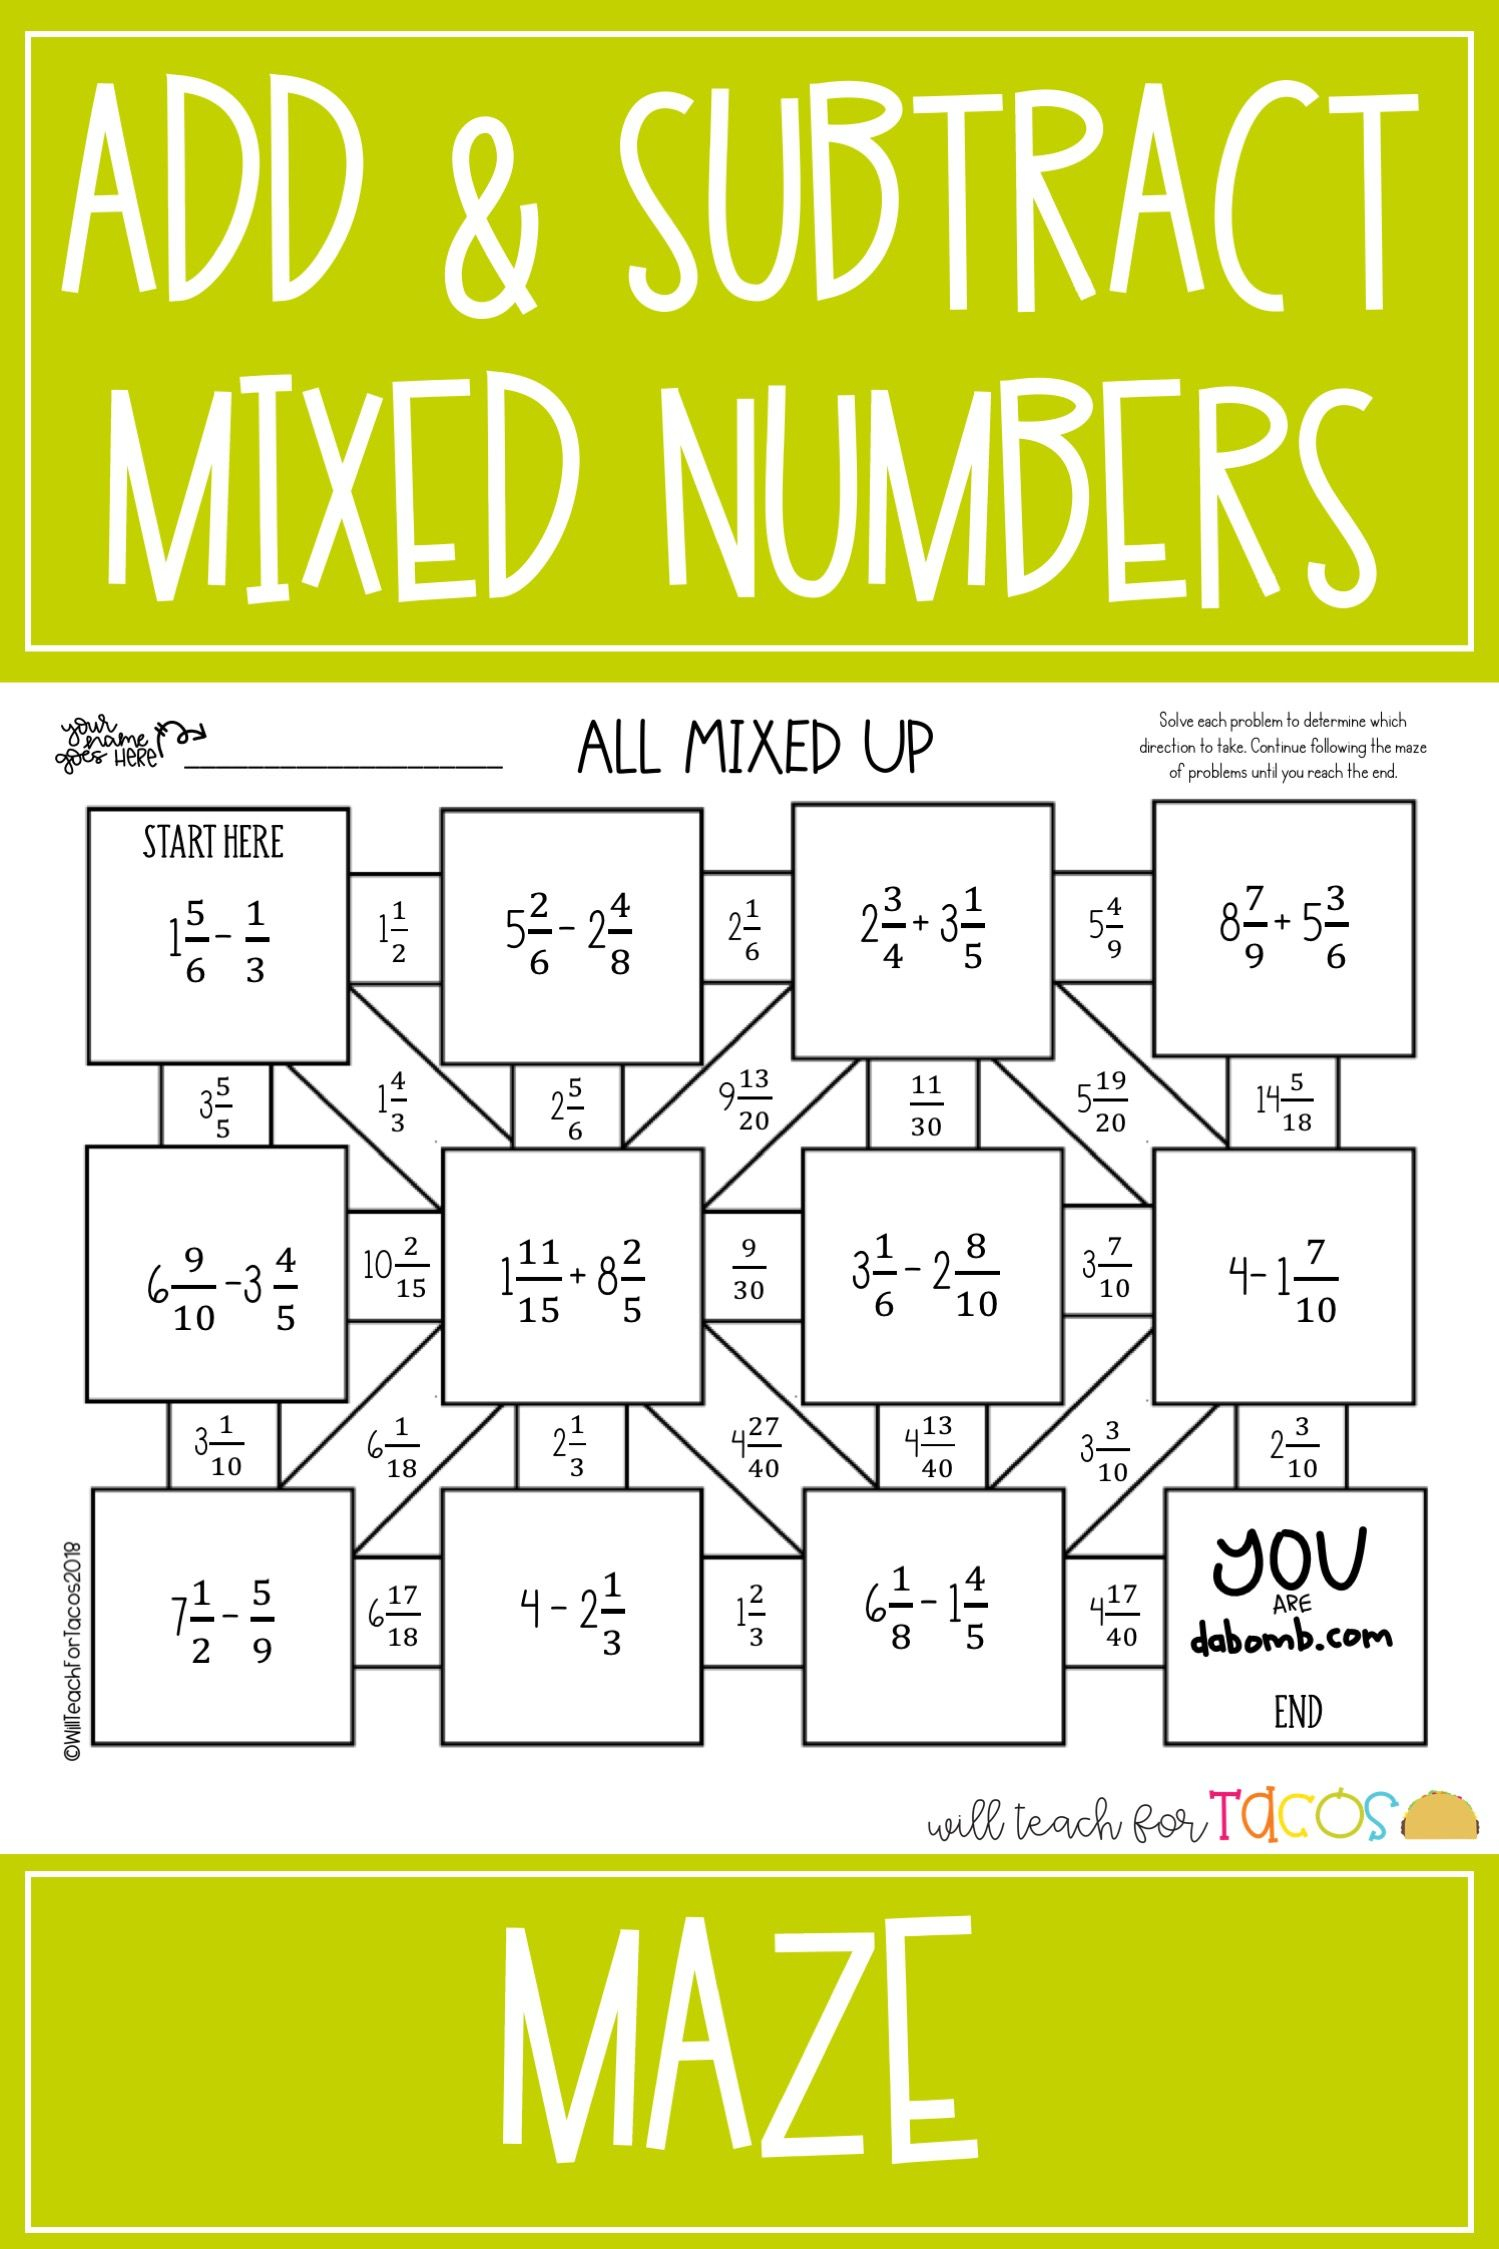 adding-and-subtracting-whole-numbers-word-problems-tek-5-3k-worksheet